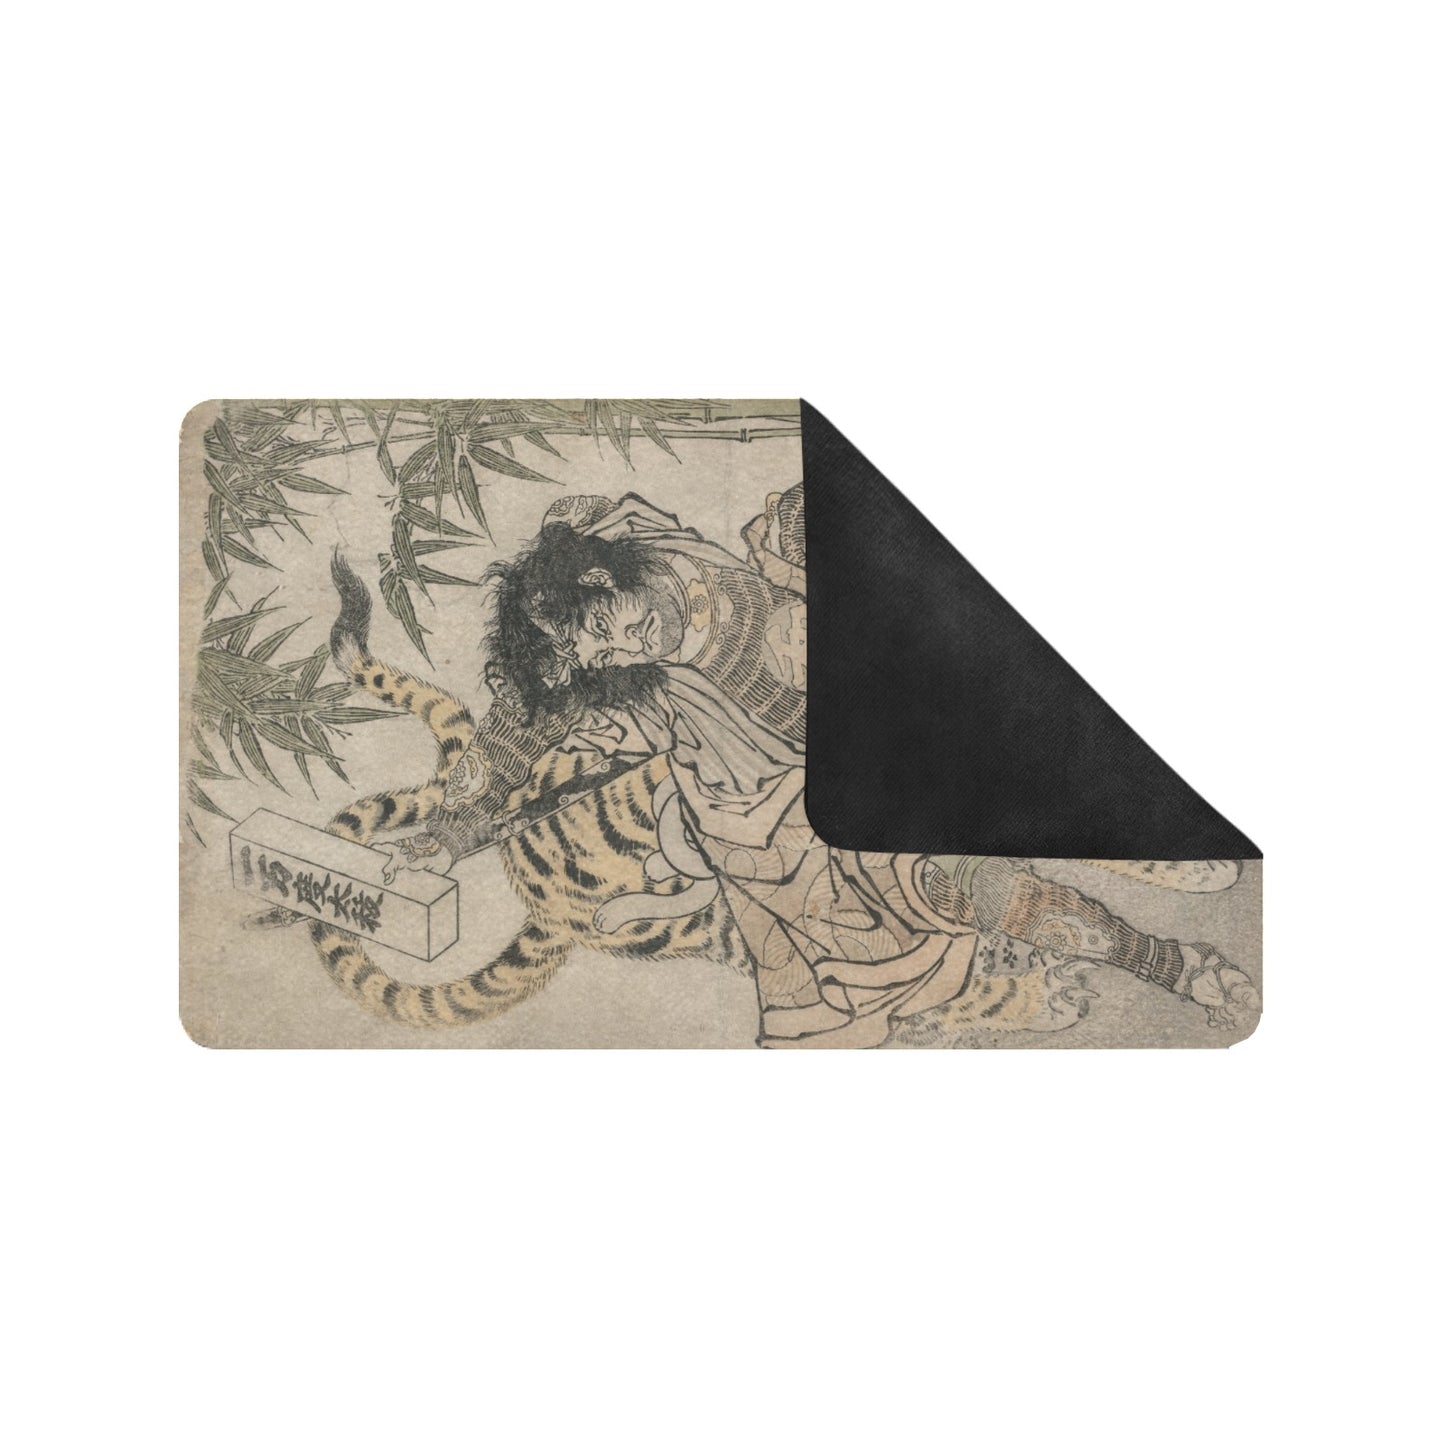 ANONYMOUS - WATONAI AND THE TIGER IN THE BAMBOO GROVE- RUBBER ART DOORMAT